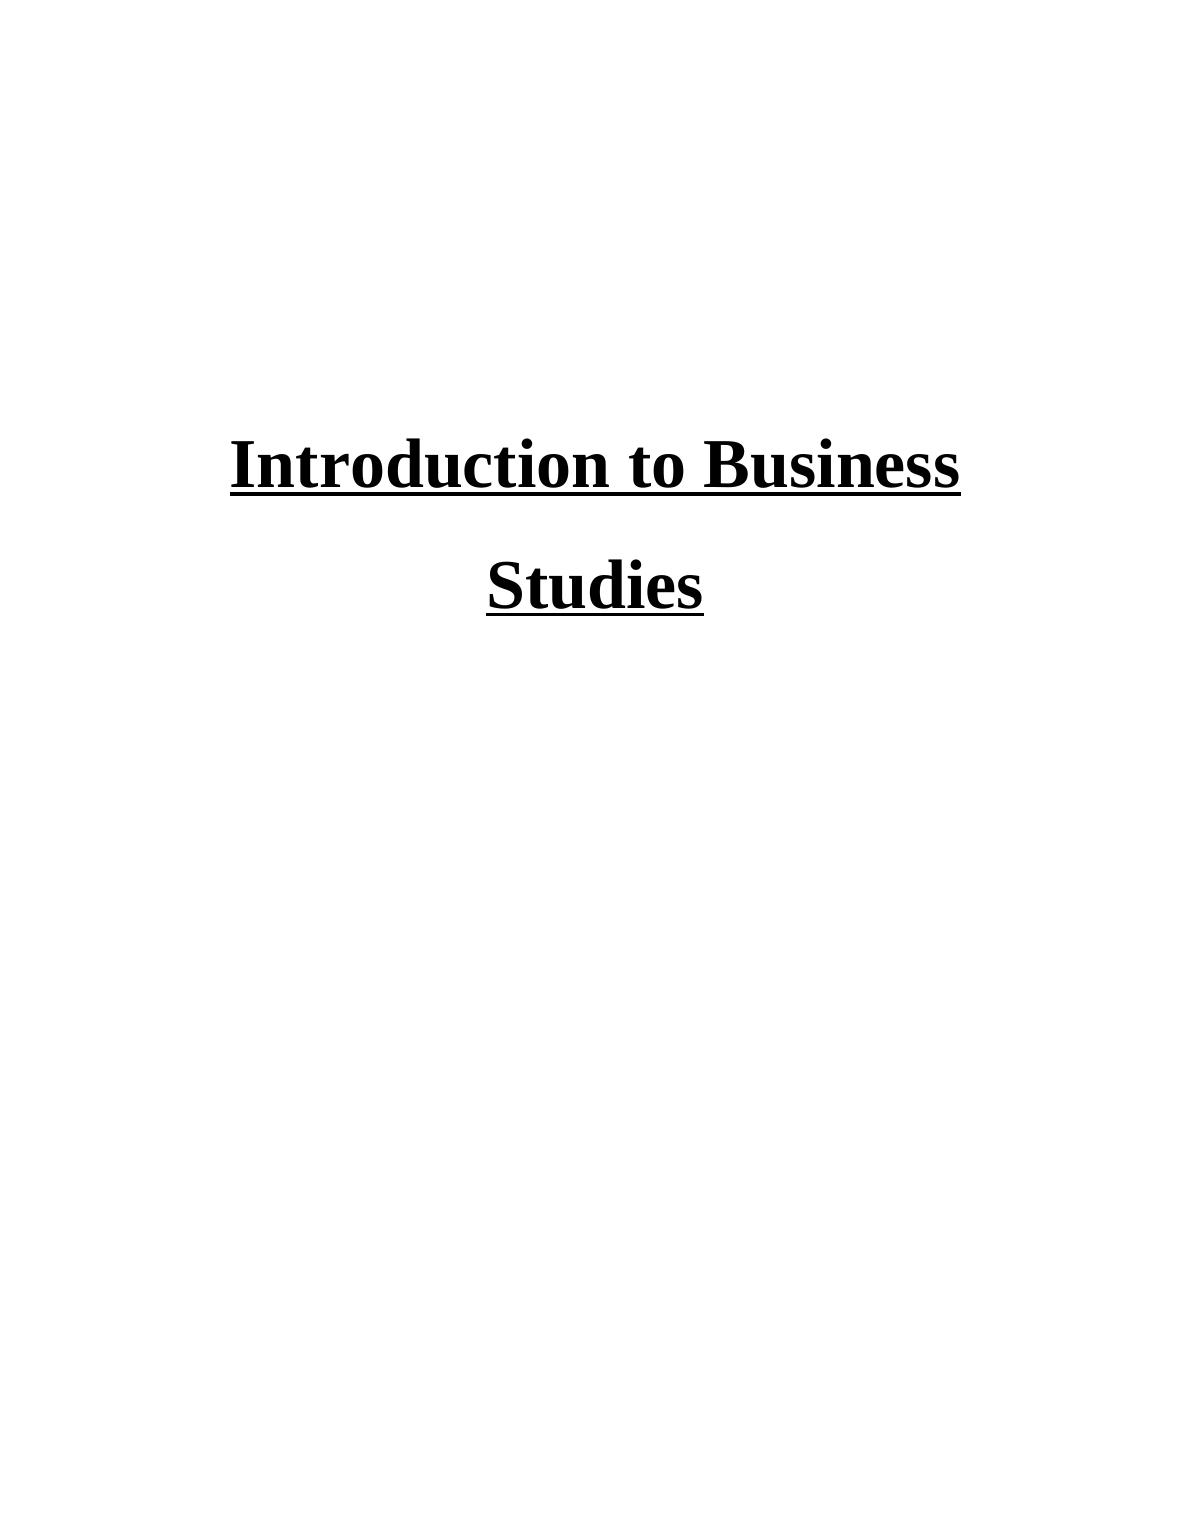 Introduction to Business Studies_1